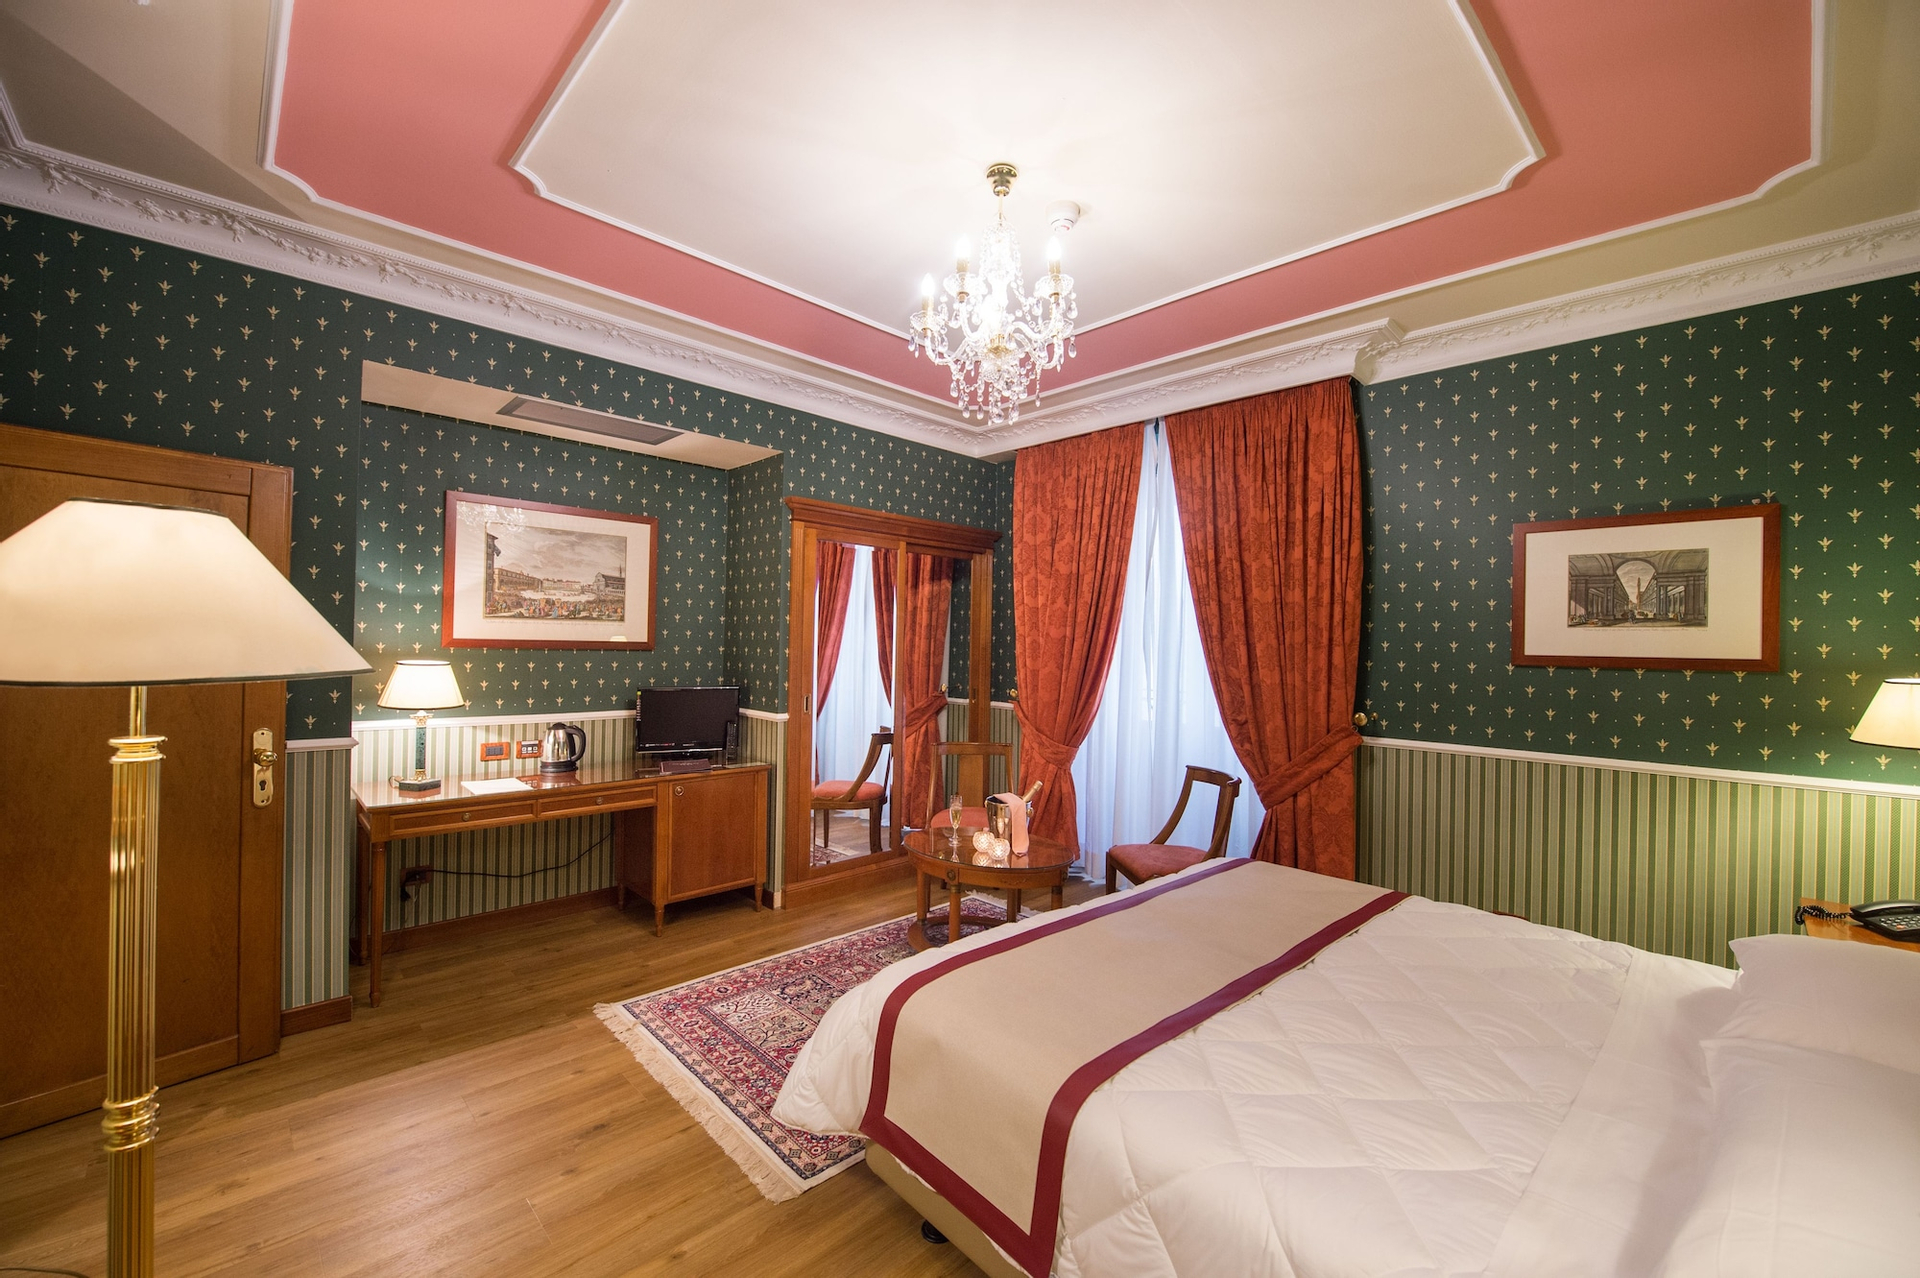 Bedroom 2, Strozzi Palace Hotel, Florence